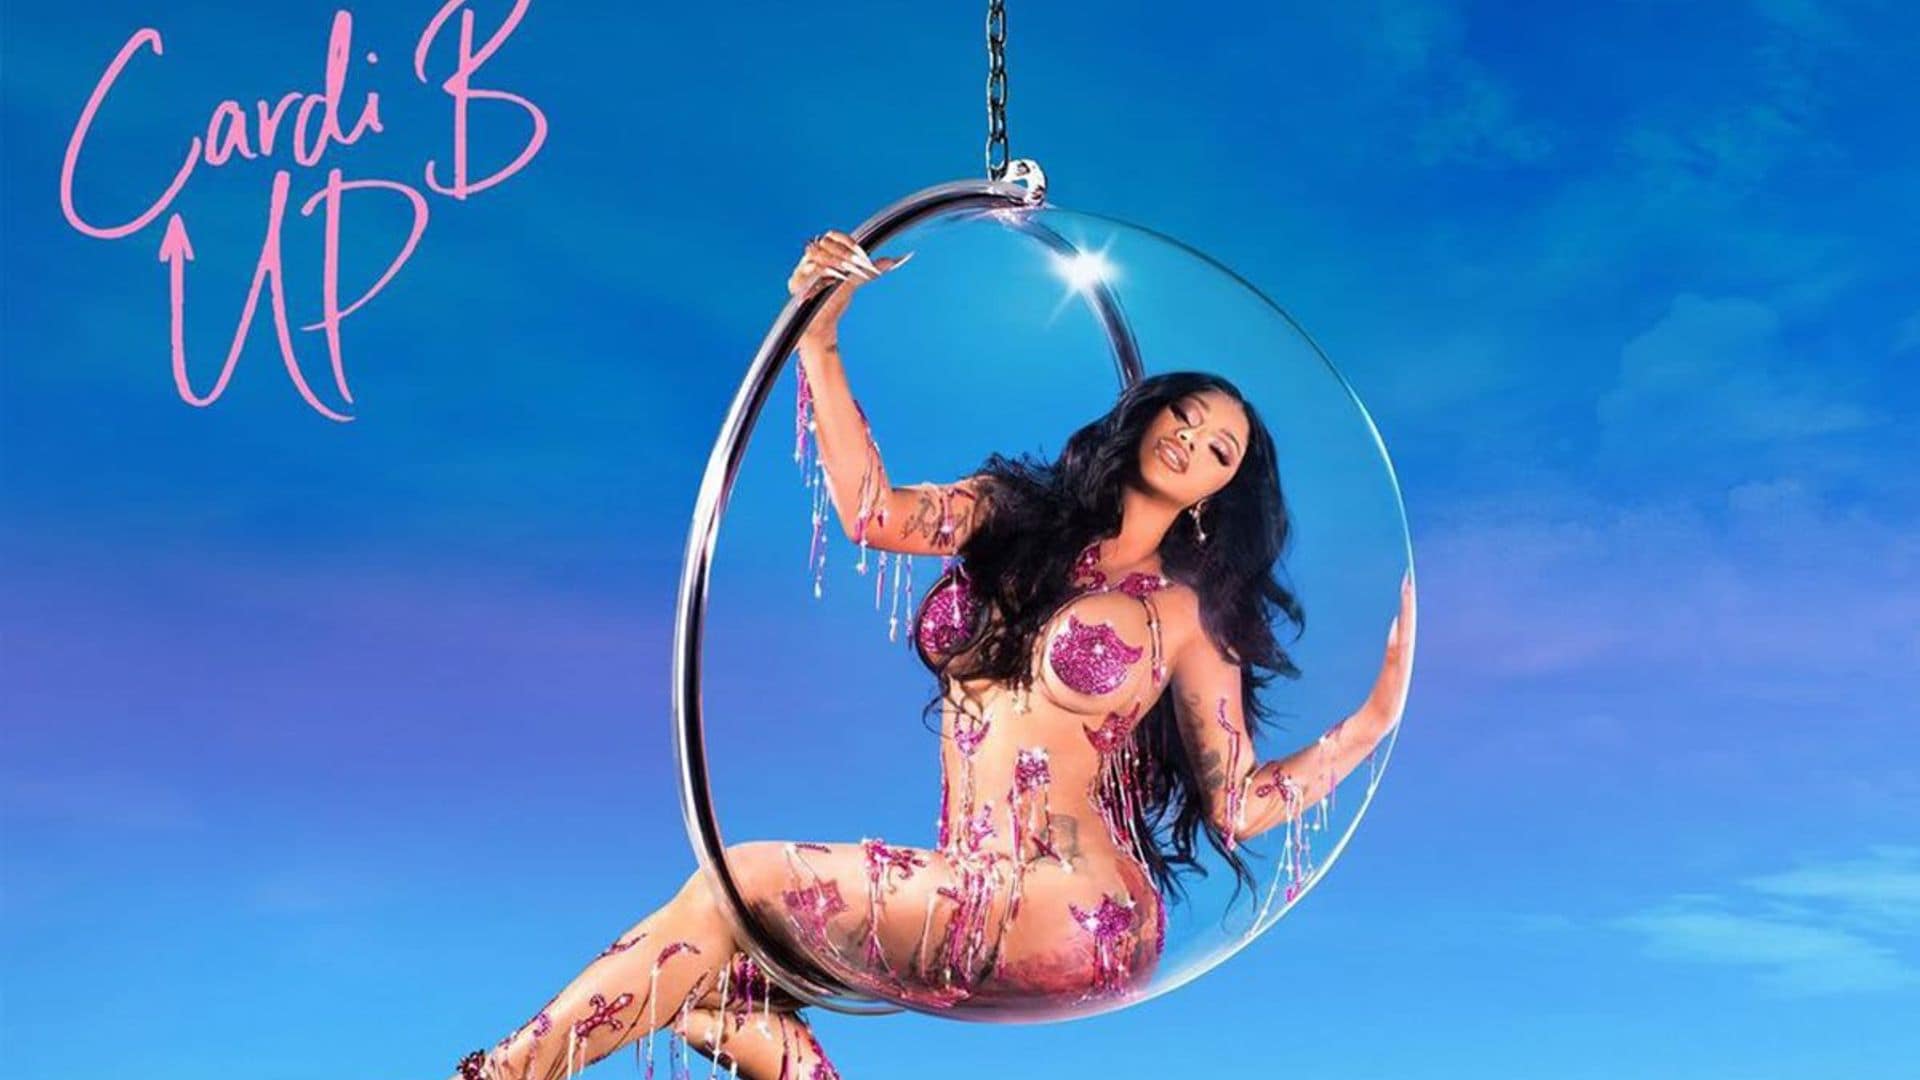 New Music Friday: the biggest releases from Cardi B, CNCO, and more